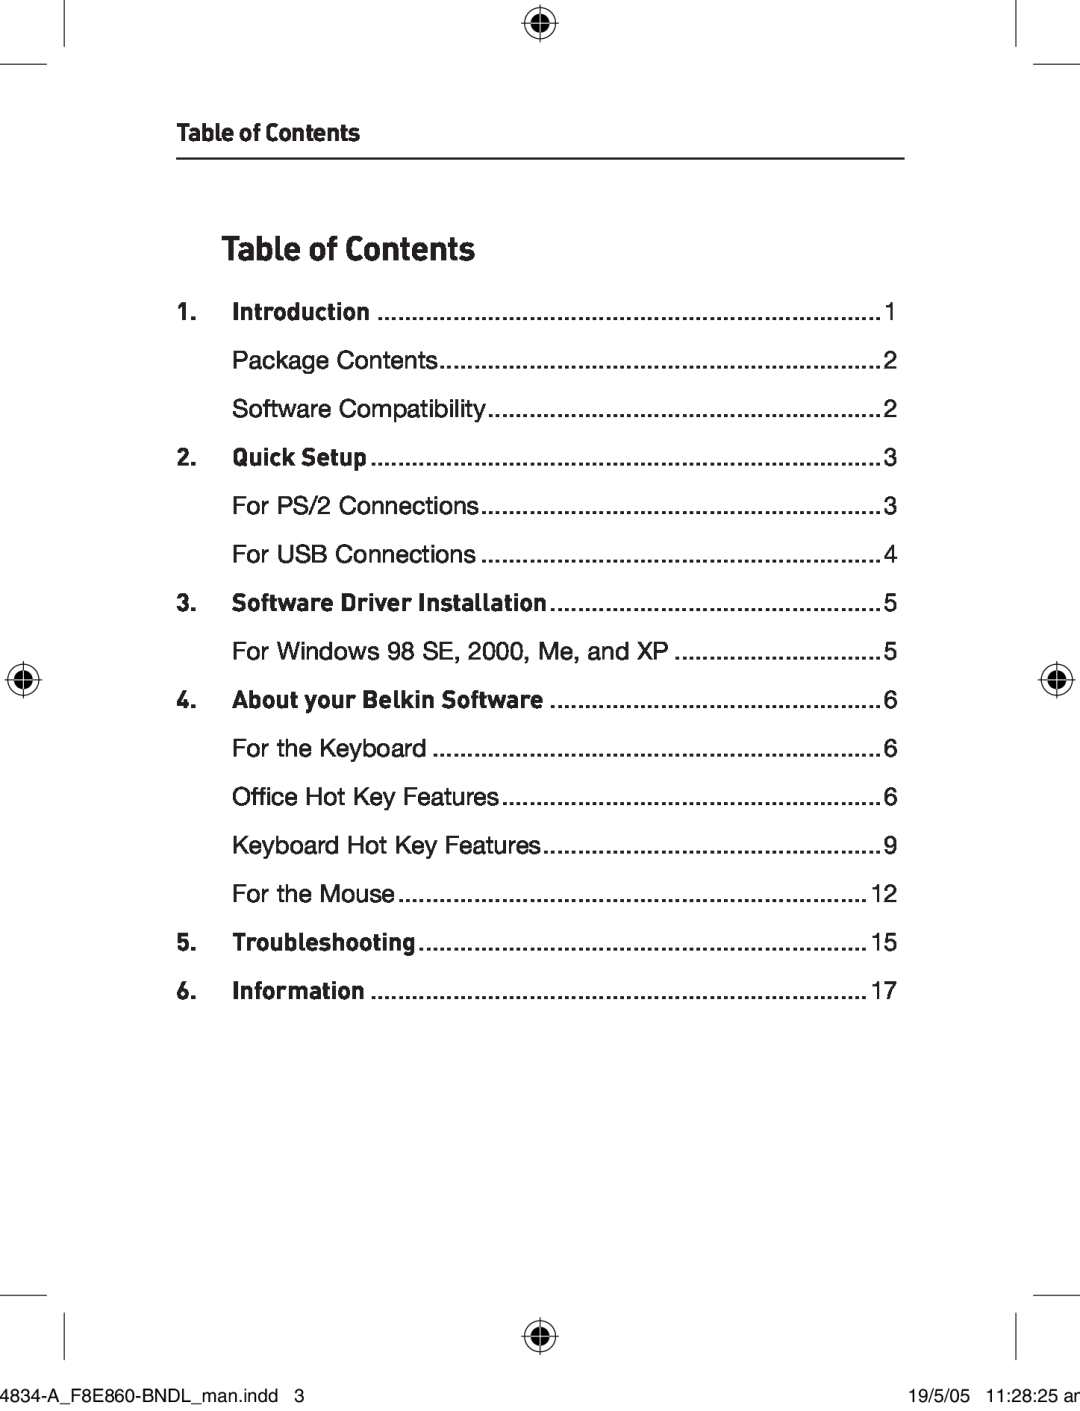 Belkin 280 manual Table of Contents, Software Compatibility 